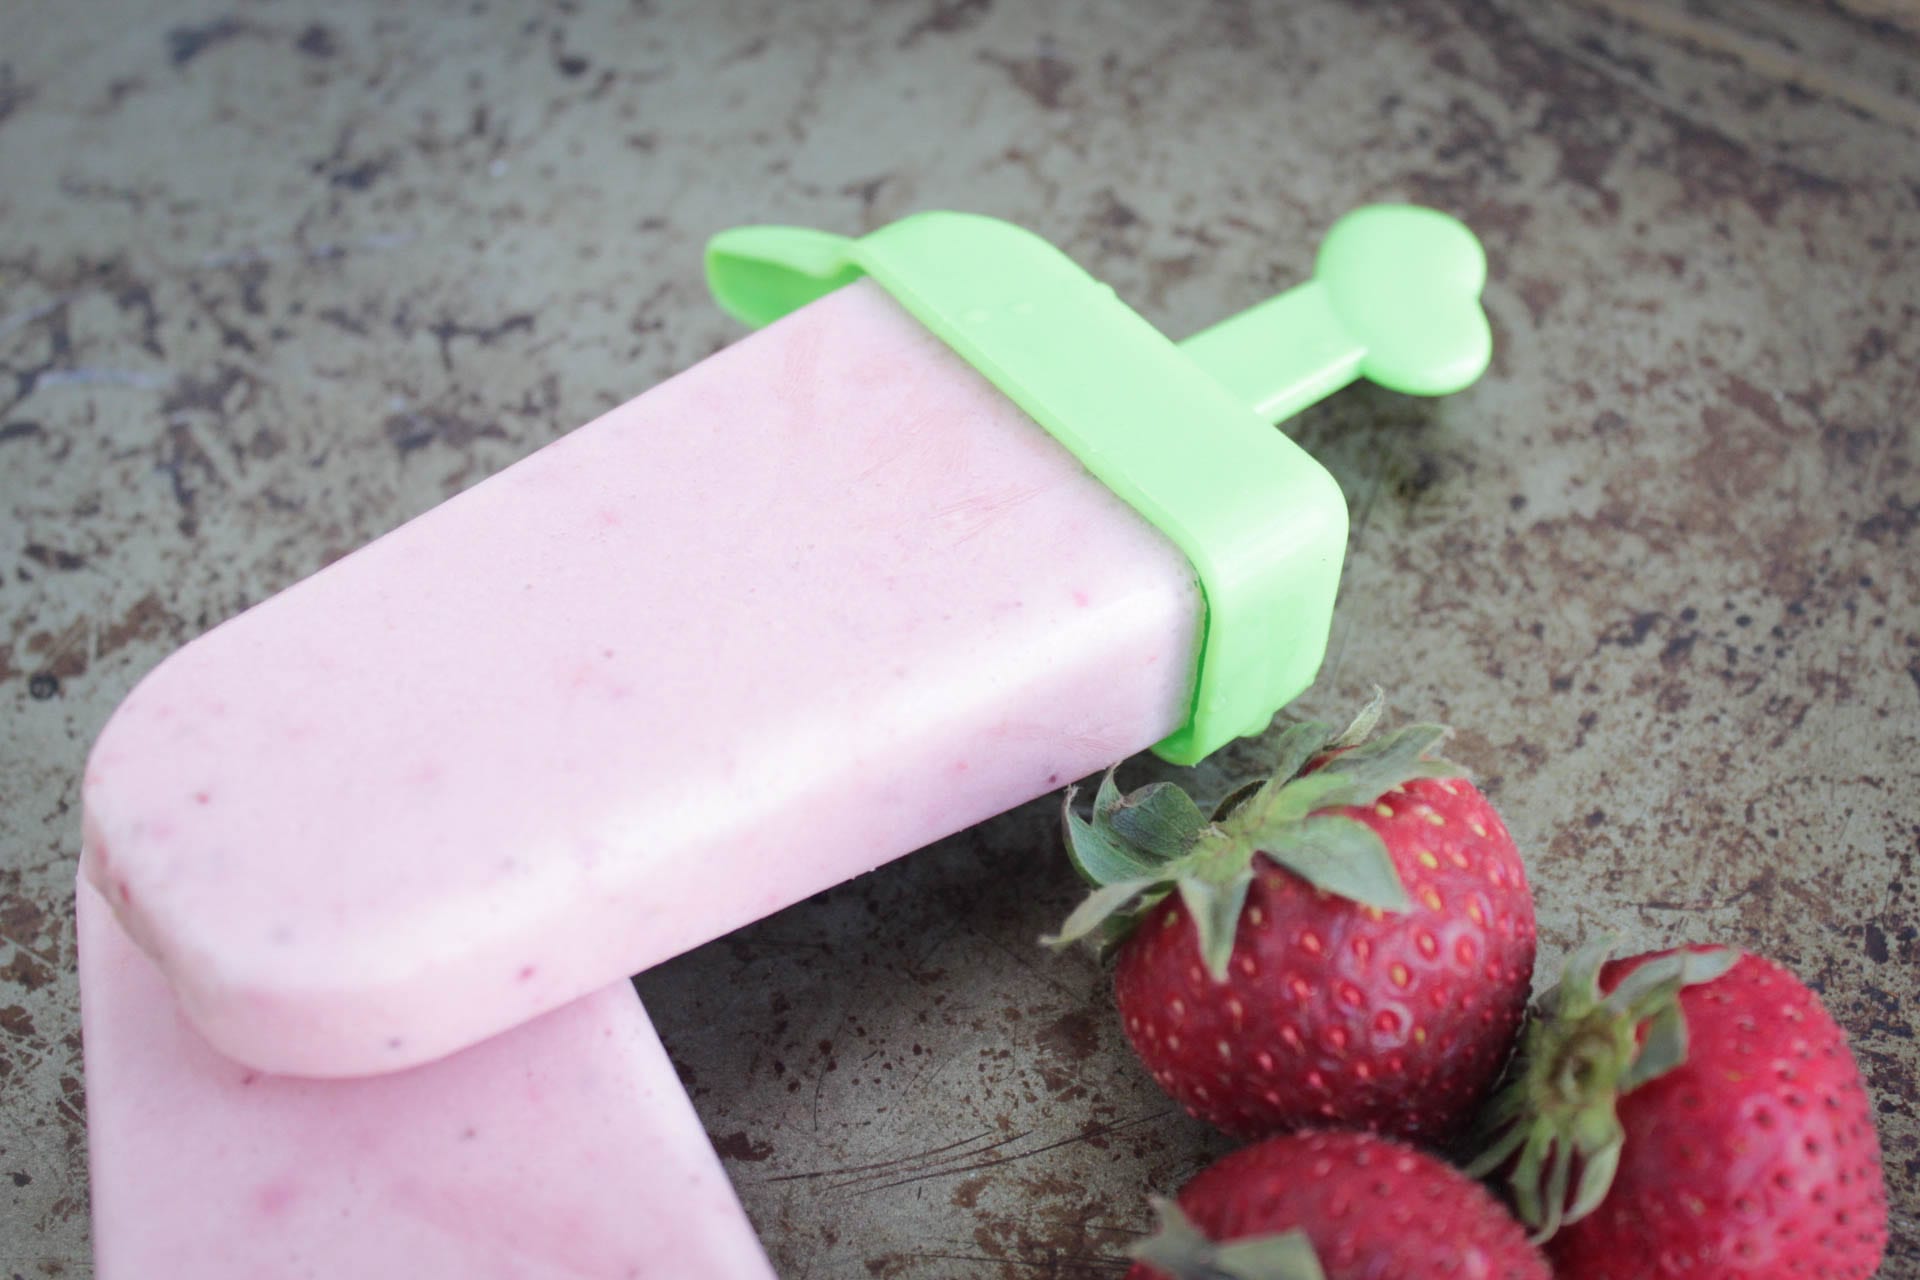 strawberry cheesecake popsicle in a popsicle mold with fresh strawberries